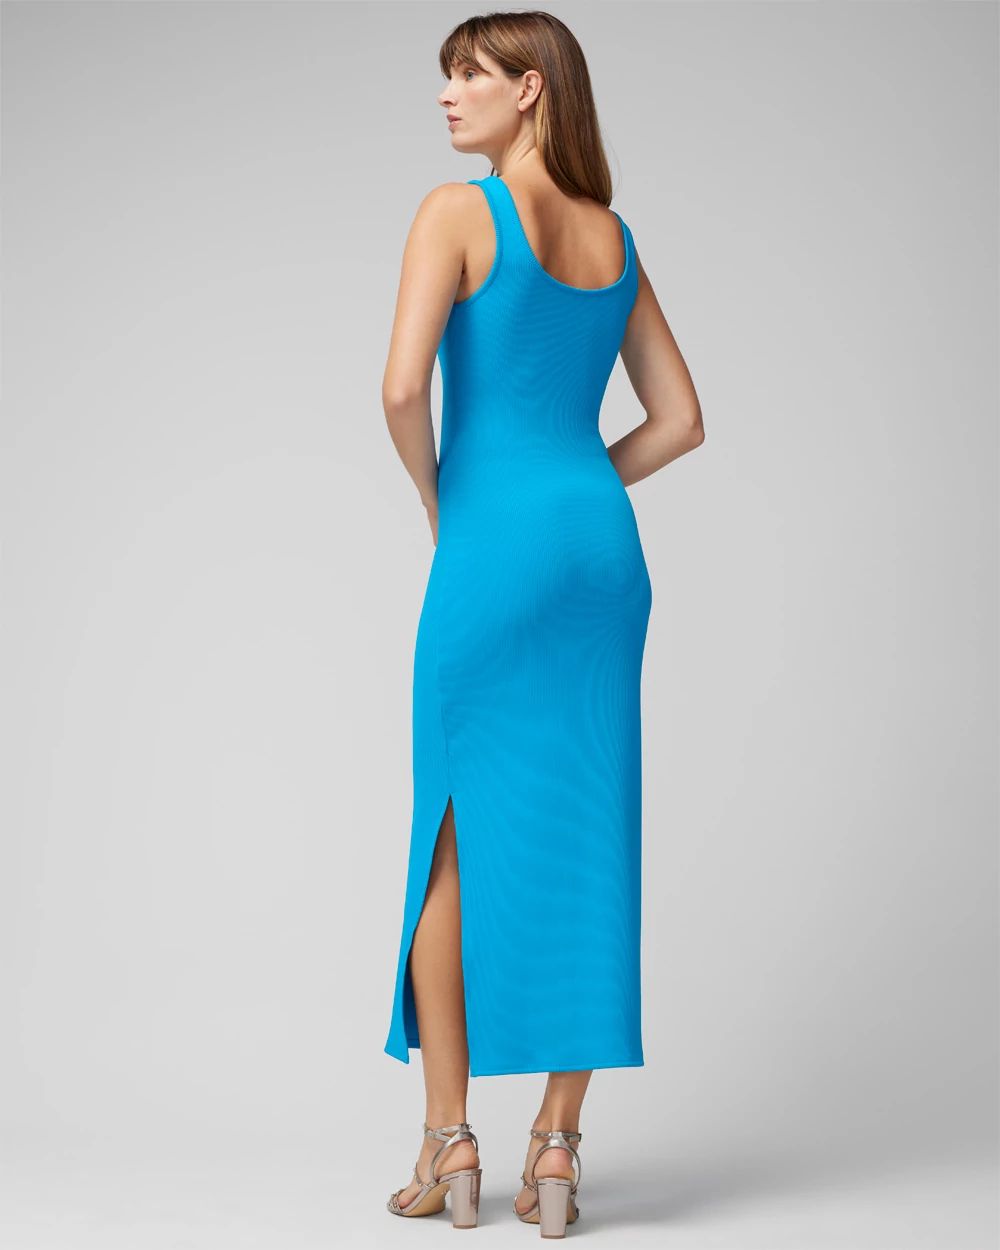 Petite WHBM® FORME Rib Scoopneck Dress click to view larger image.